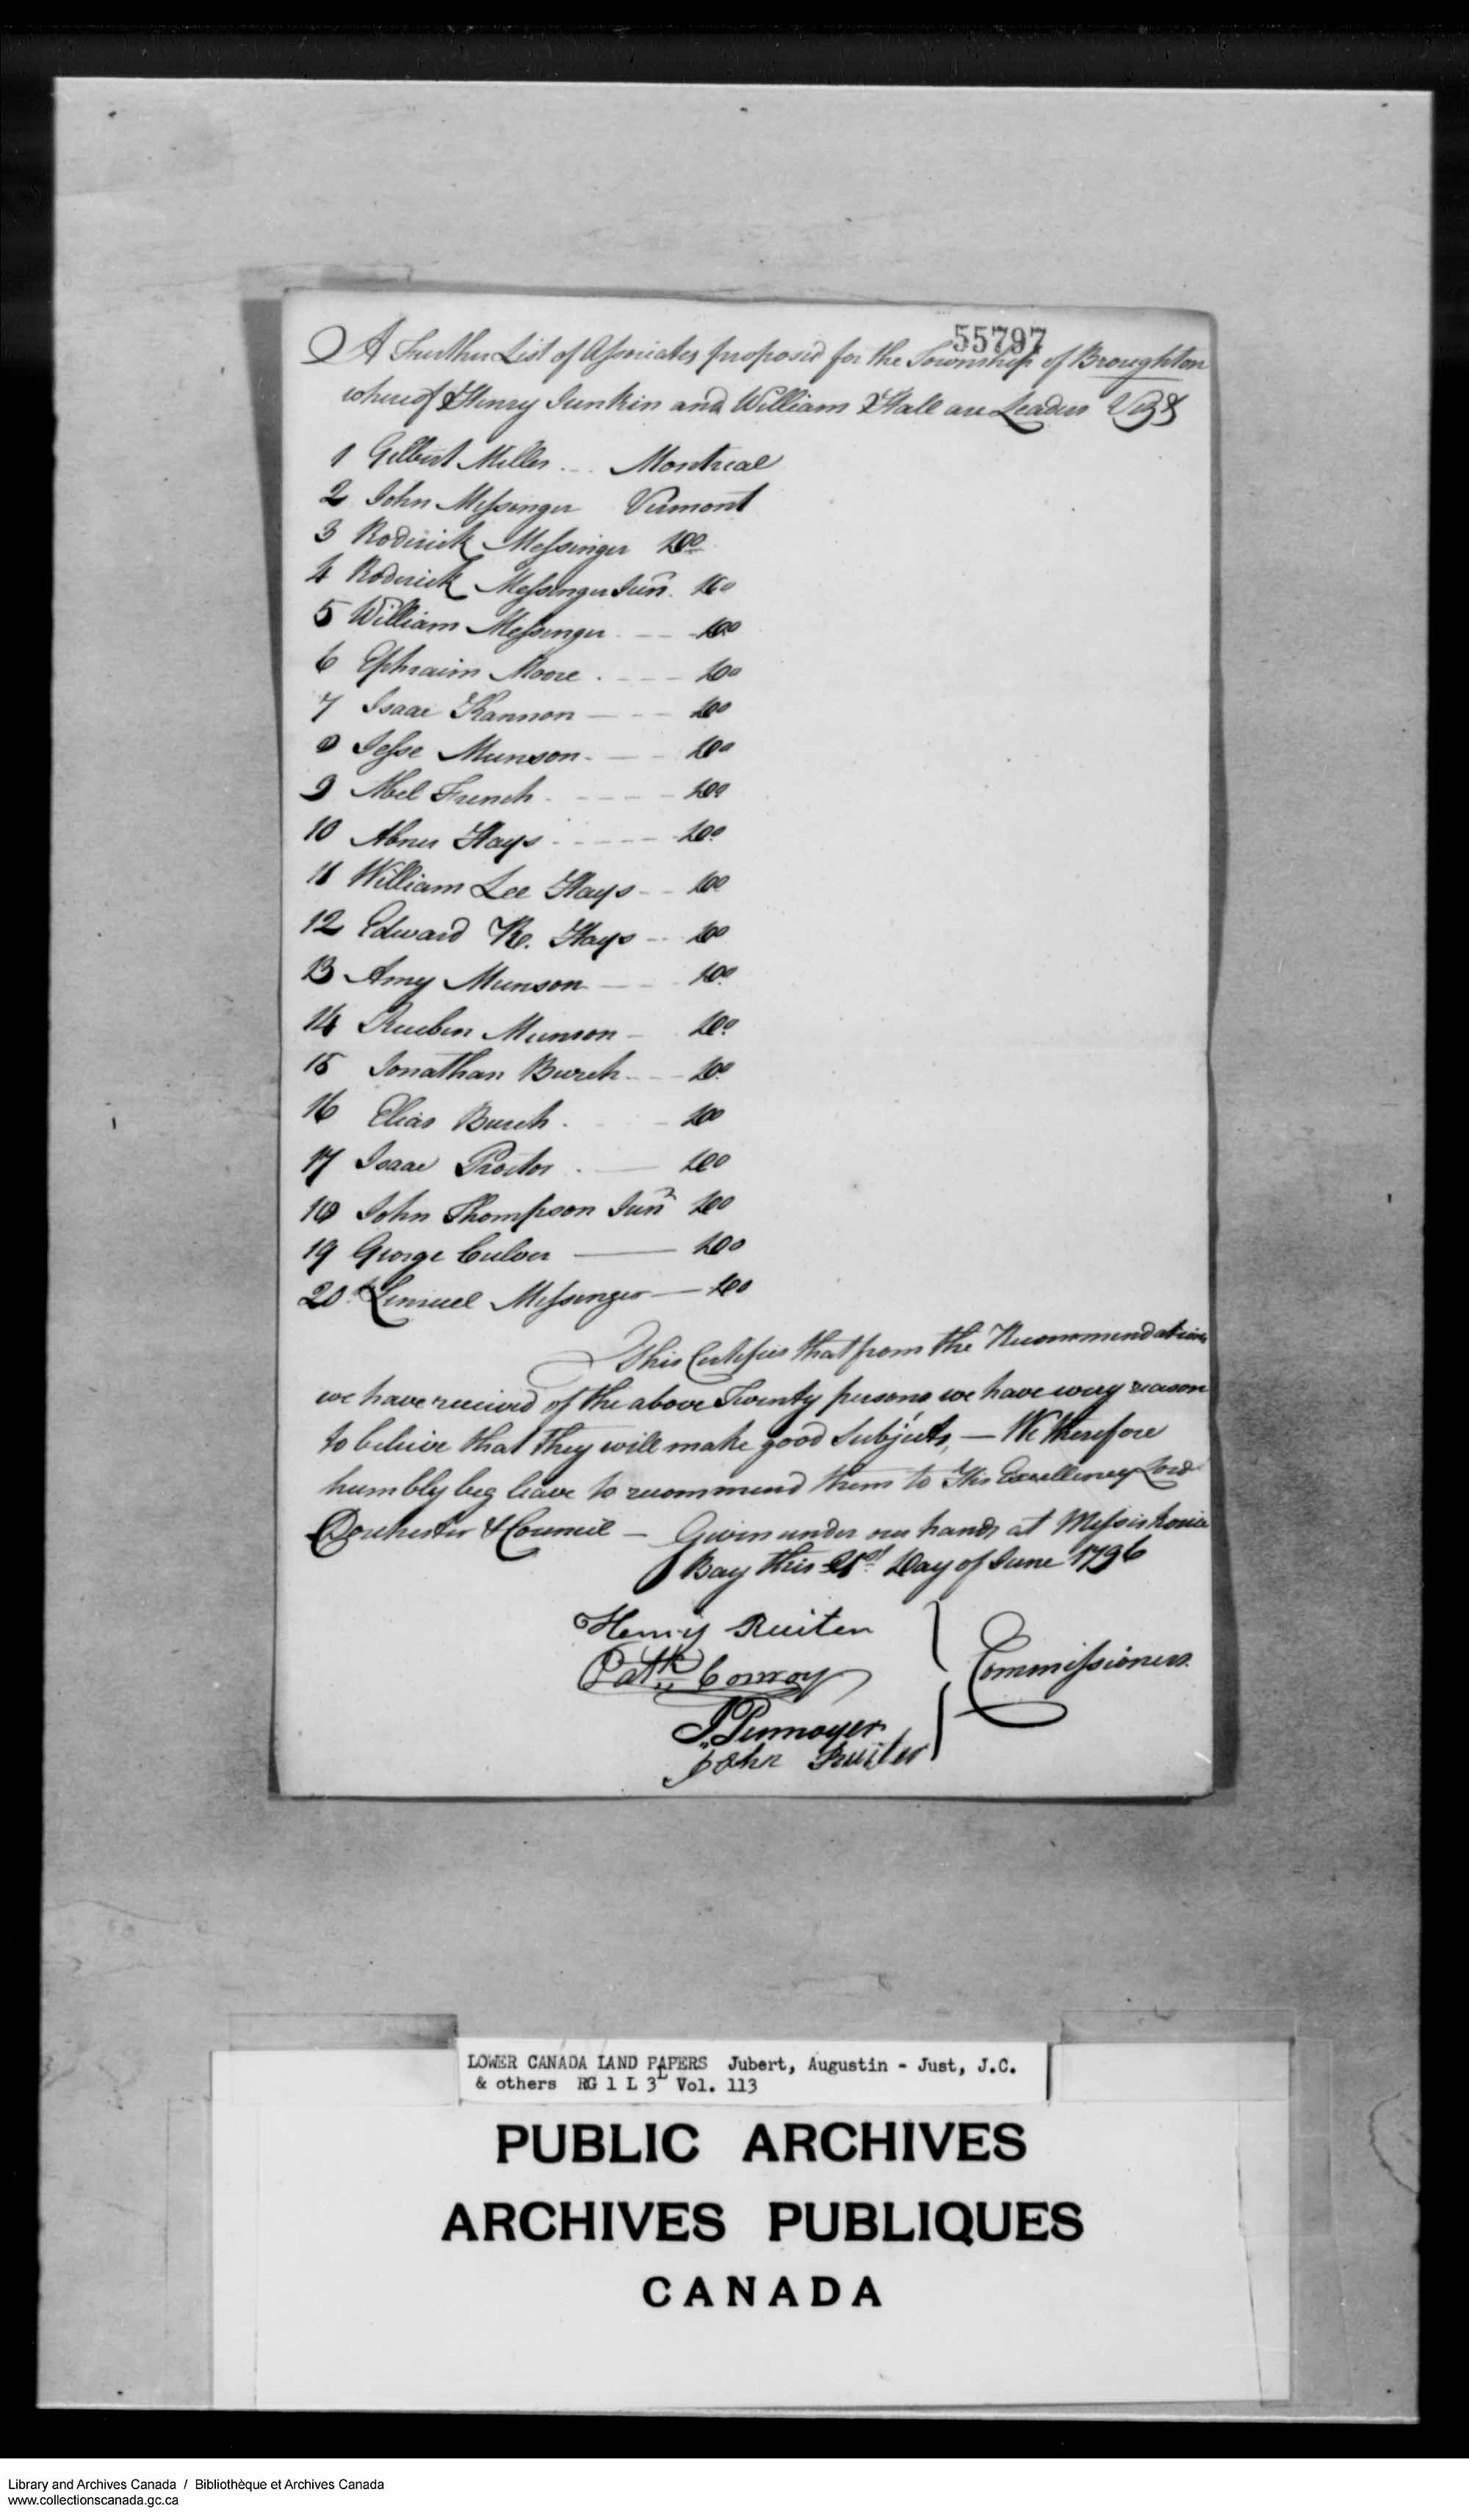 Digitized page of  for Image No.: e008700284